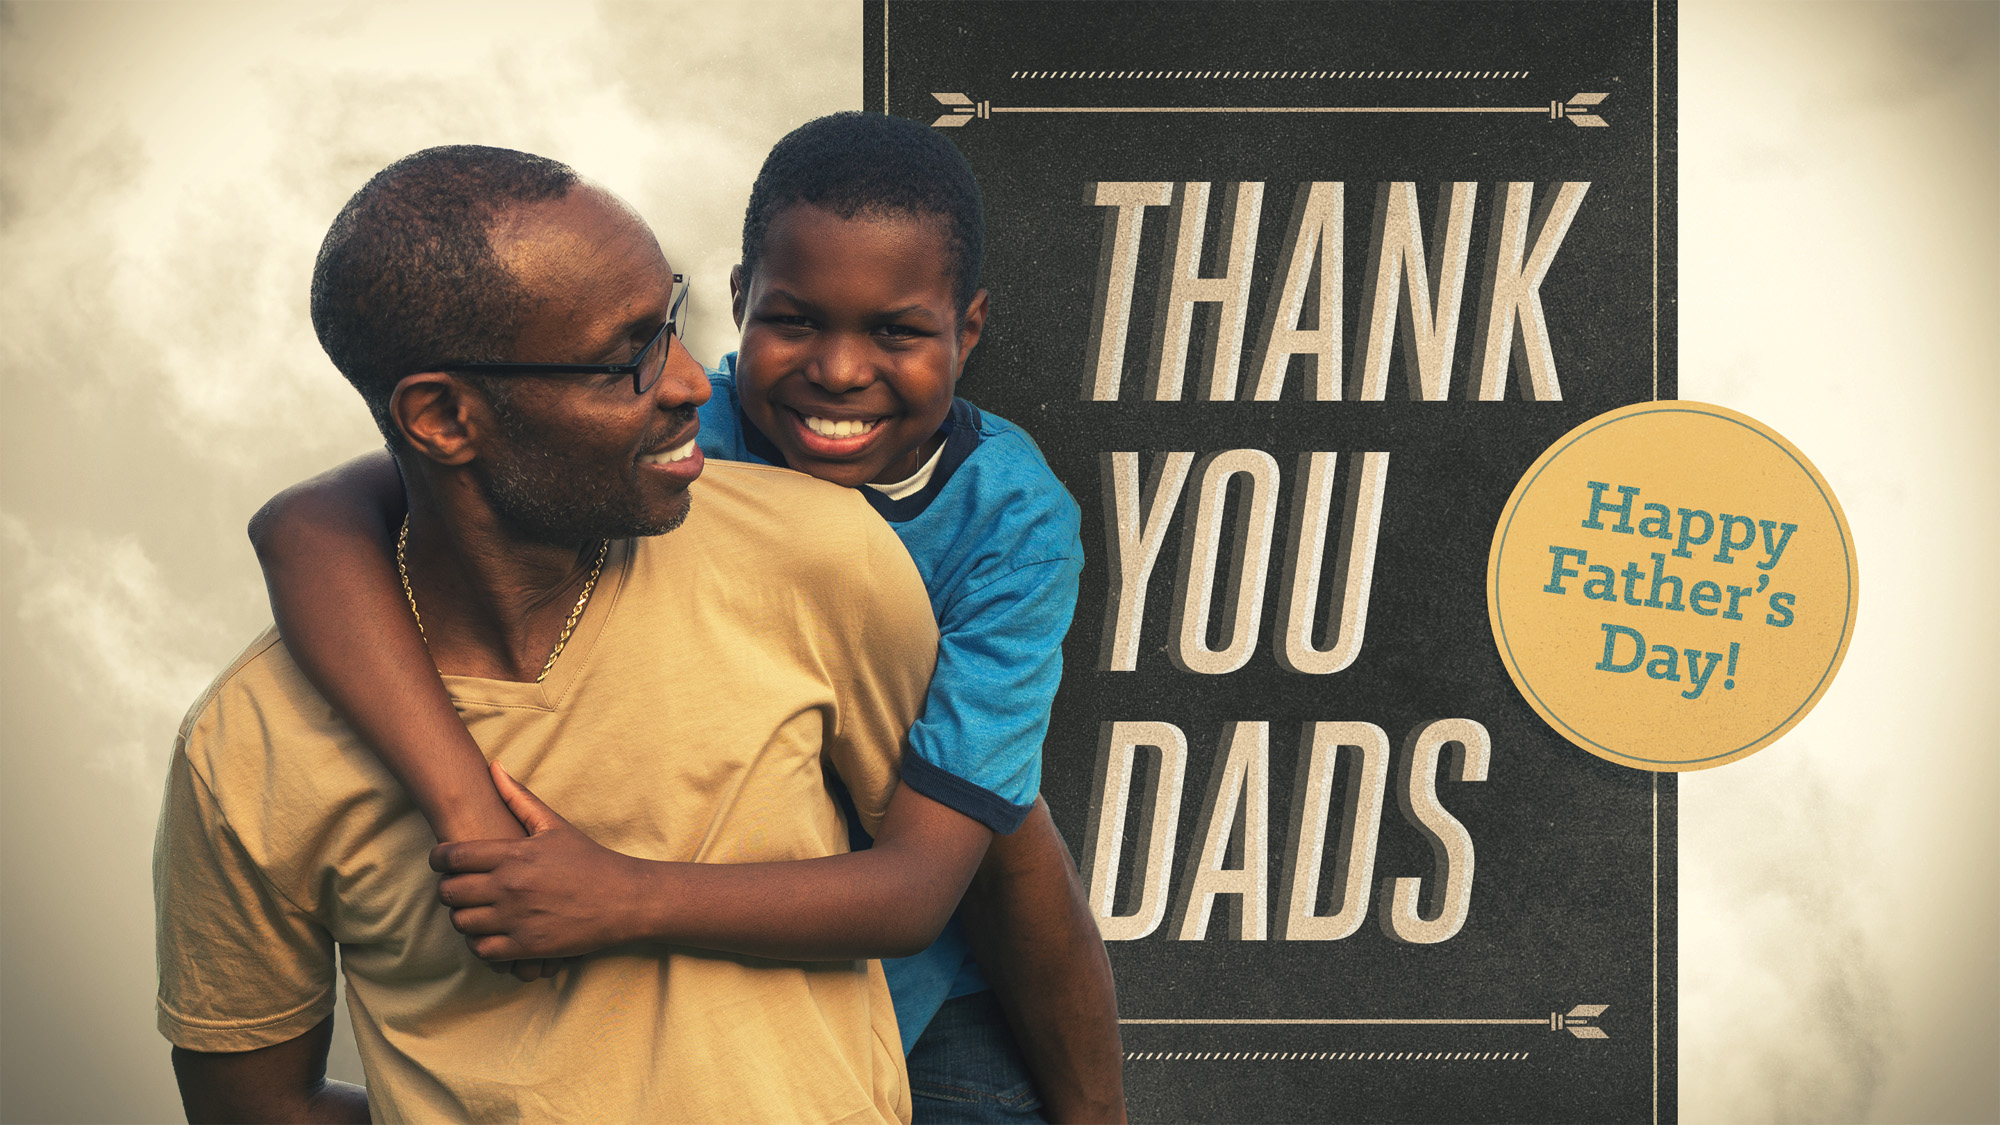 Thank You Dads!